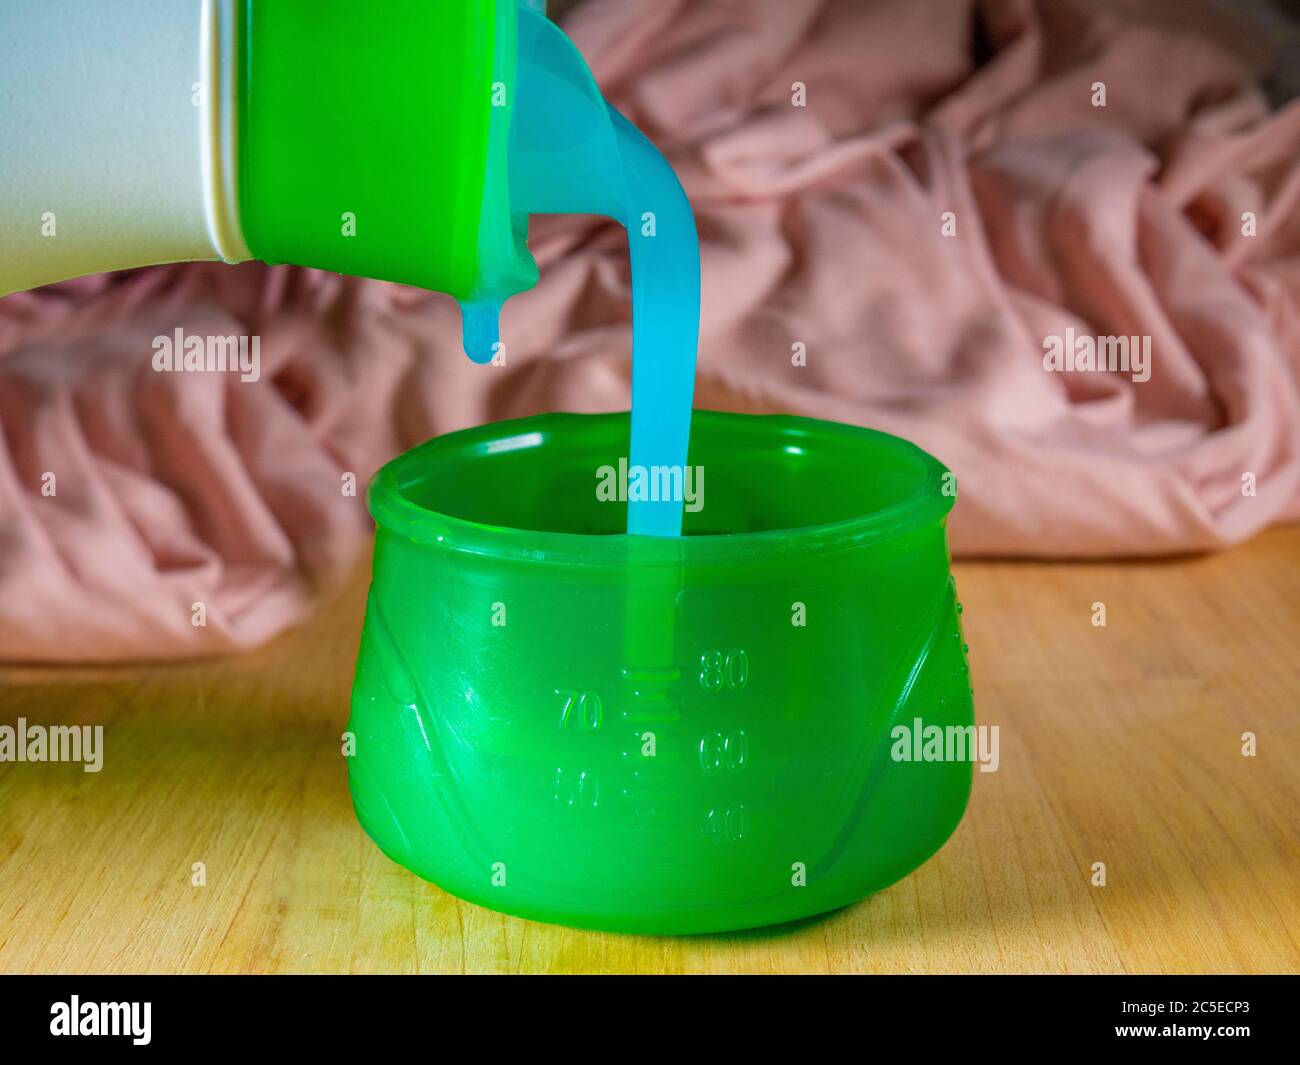 https://c8.alamy.com/comp/2C5ECP3/closeup-of-liquid-gel-detergent-pouring-from-the-spout-of-a-plastic-bottle-into-a-measuring-cup-with-dirty-washing-laundry-in-the-background-2C5ECP3.jpg